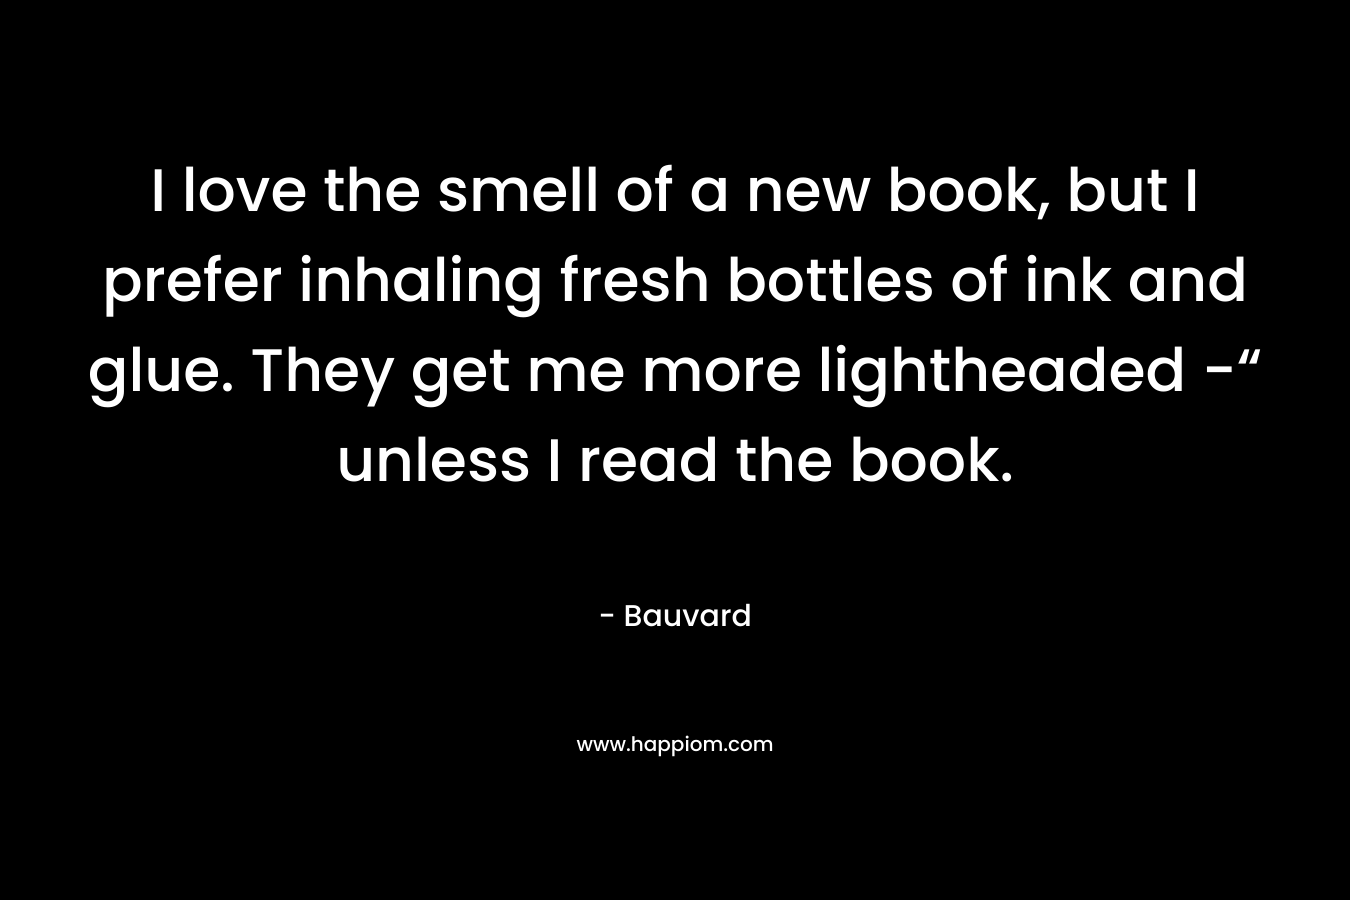 I love the smell of a new book, but I prefer inhaling fresh bottles of ink and glue. They get me more lightheaded -“ unless I read the book.